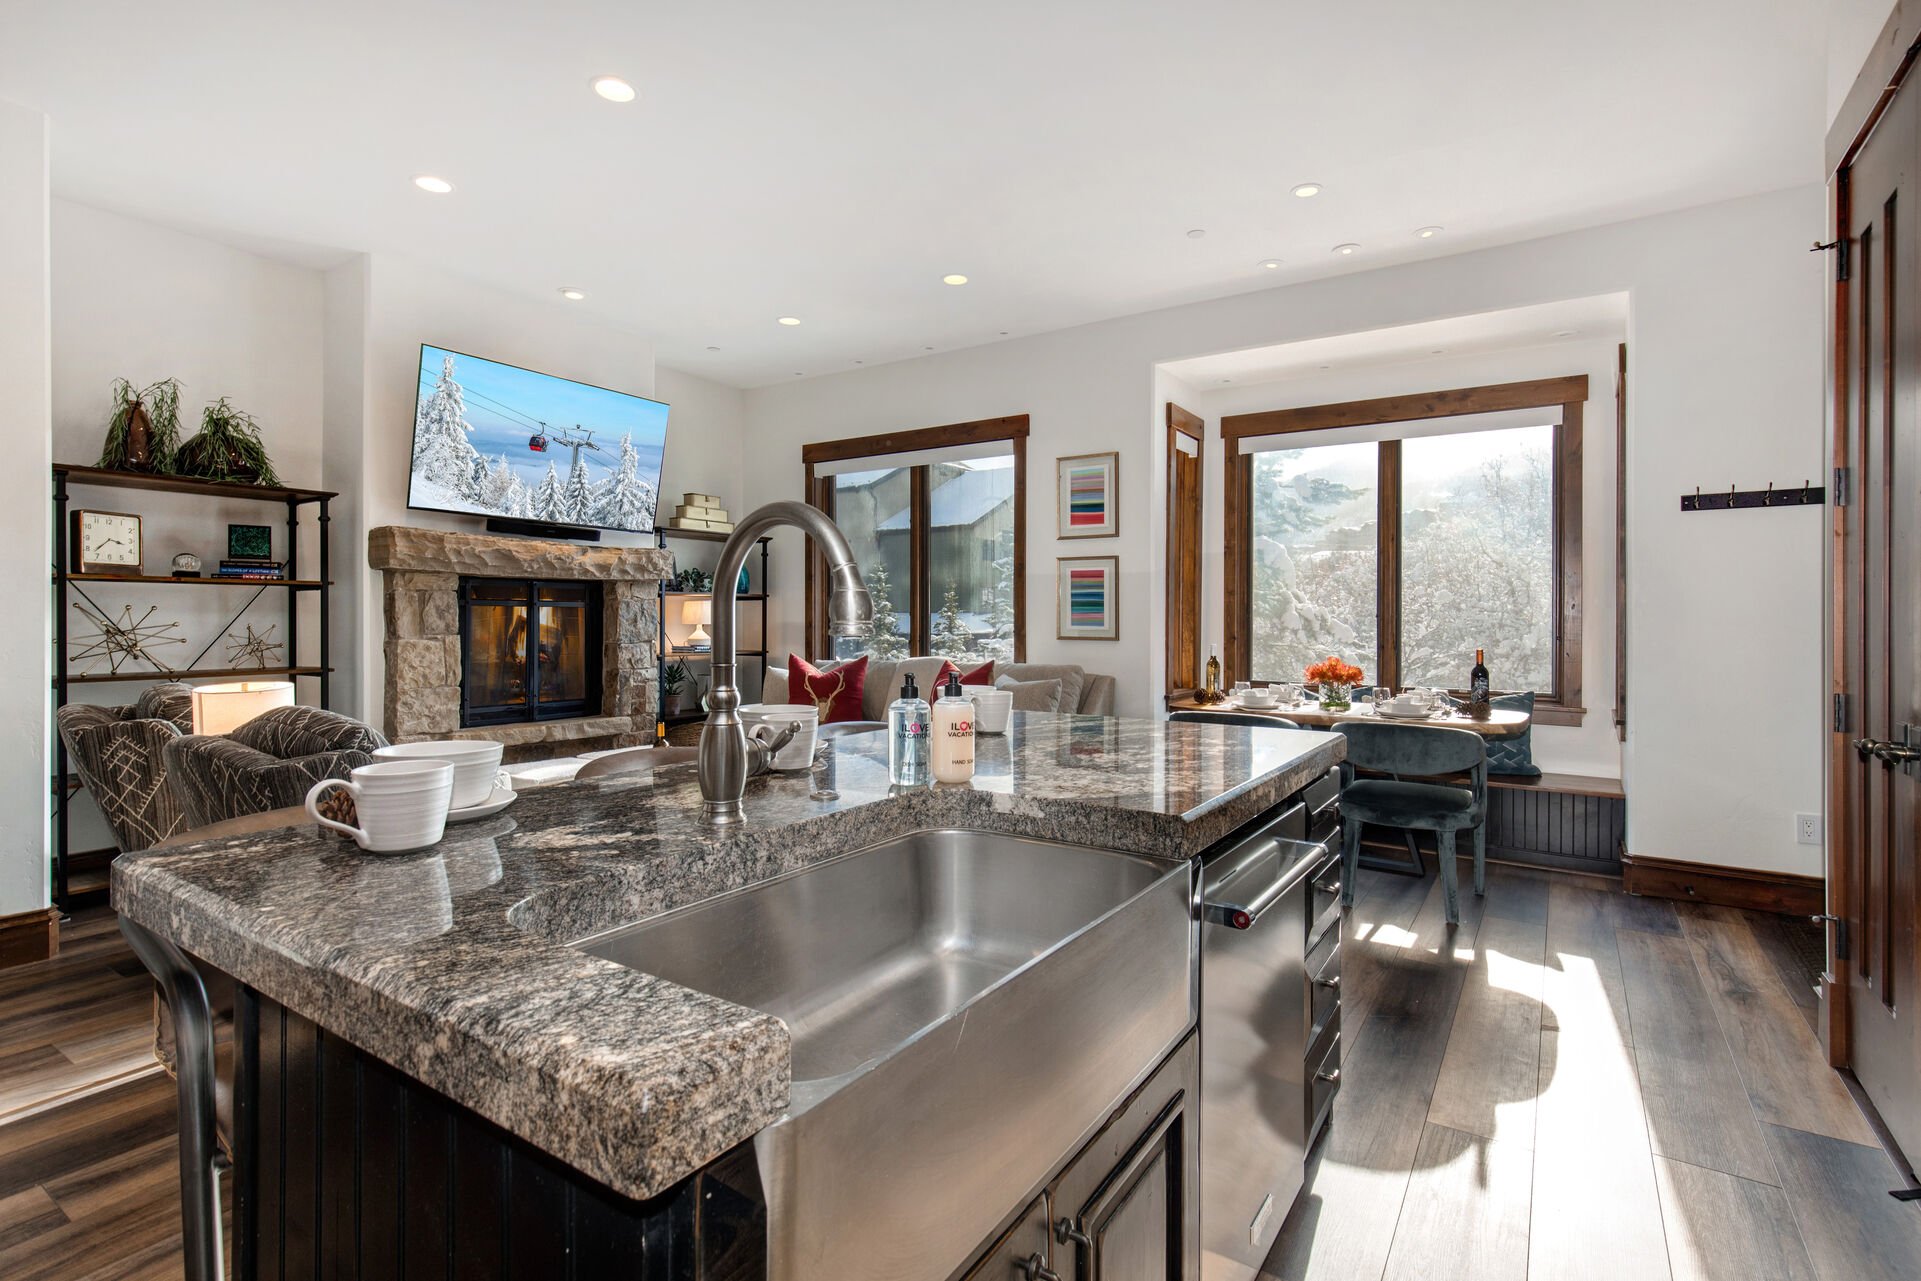 Fully equipped gourmet kitchen boasting high-end Viking appliances including a six-burner gas range and convection oven, stunning granite countertops, and a large center island with plush seating for three